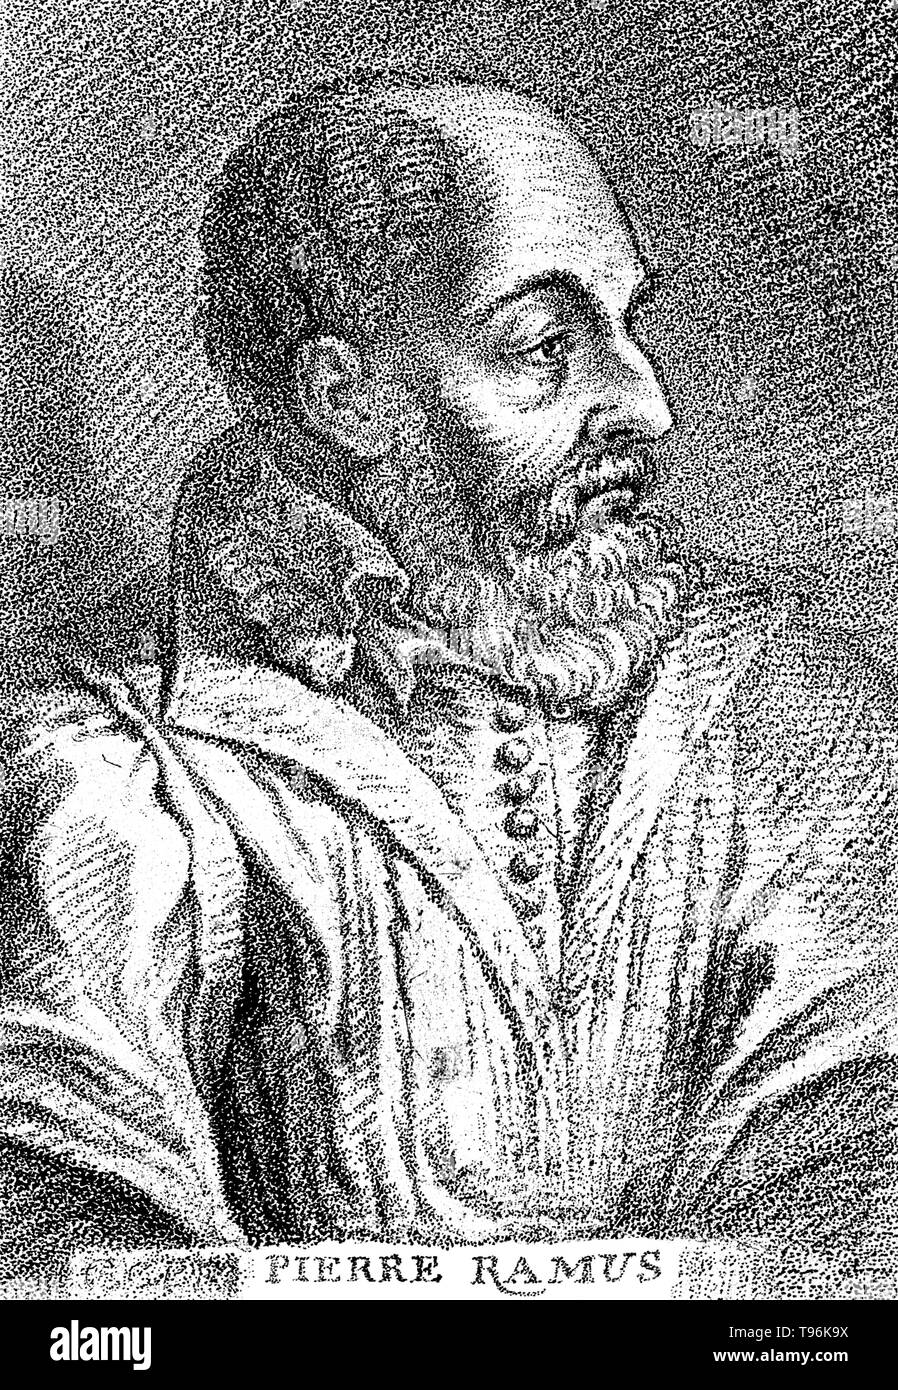 Petrus Ramus (1515 - August 26, 1572) was an influential French humanist, logician, and educational reformer. He gained admission at age twelve, to the Collège de Navarre, working as a servant. A reaction against scholasticism was in full tide, at a transitional time for Aristotelianism. A central issue to his anti-Aristotelianism arose out of a concern for pedagogy. Stock Photo